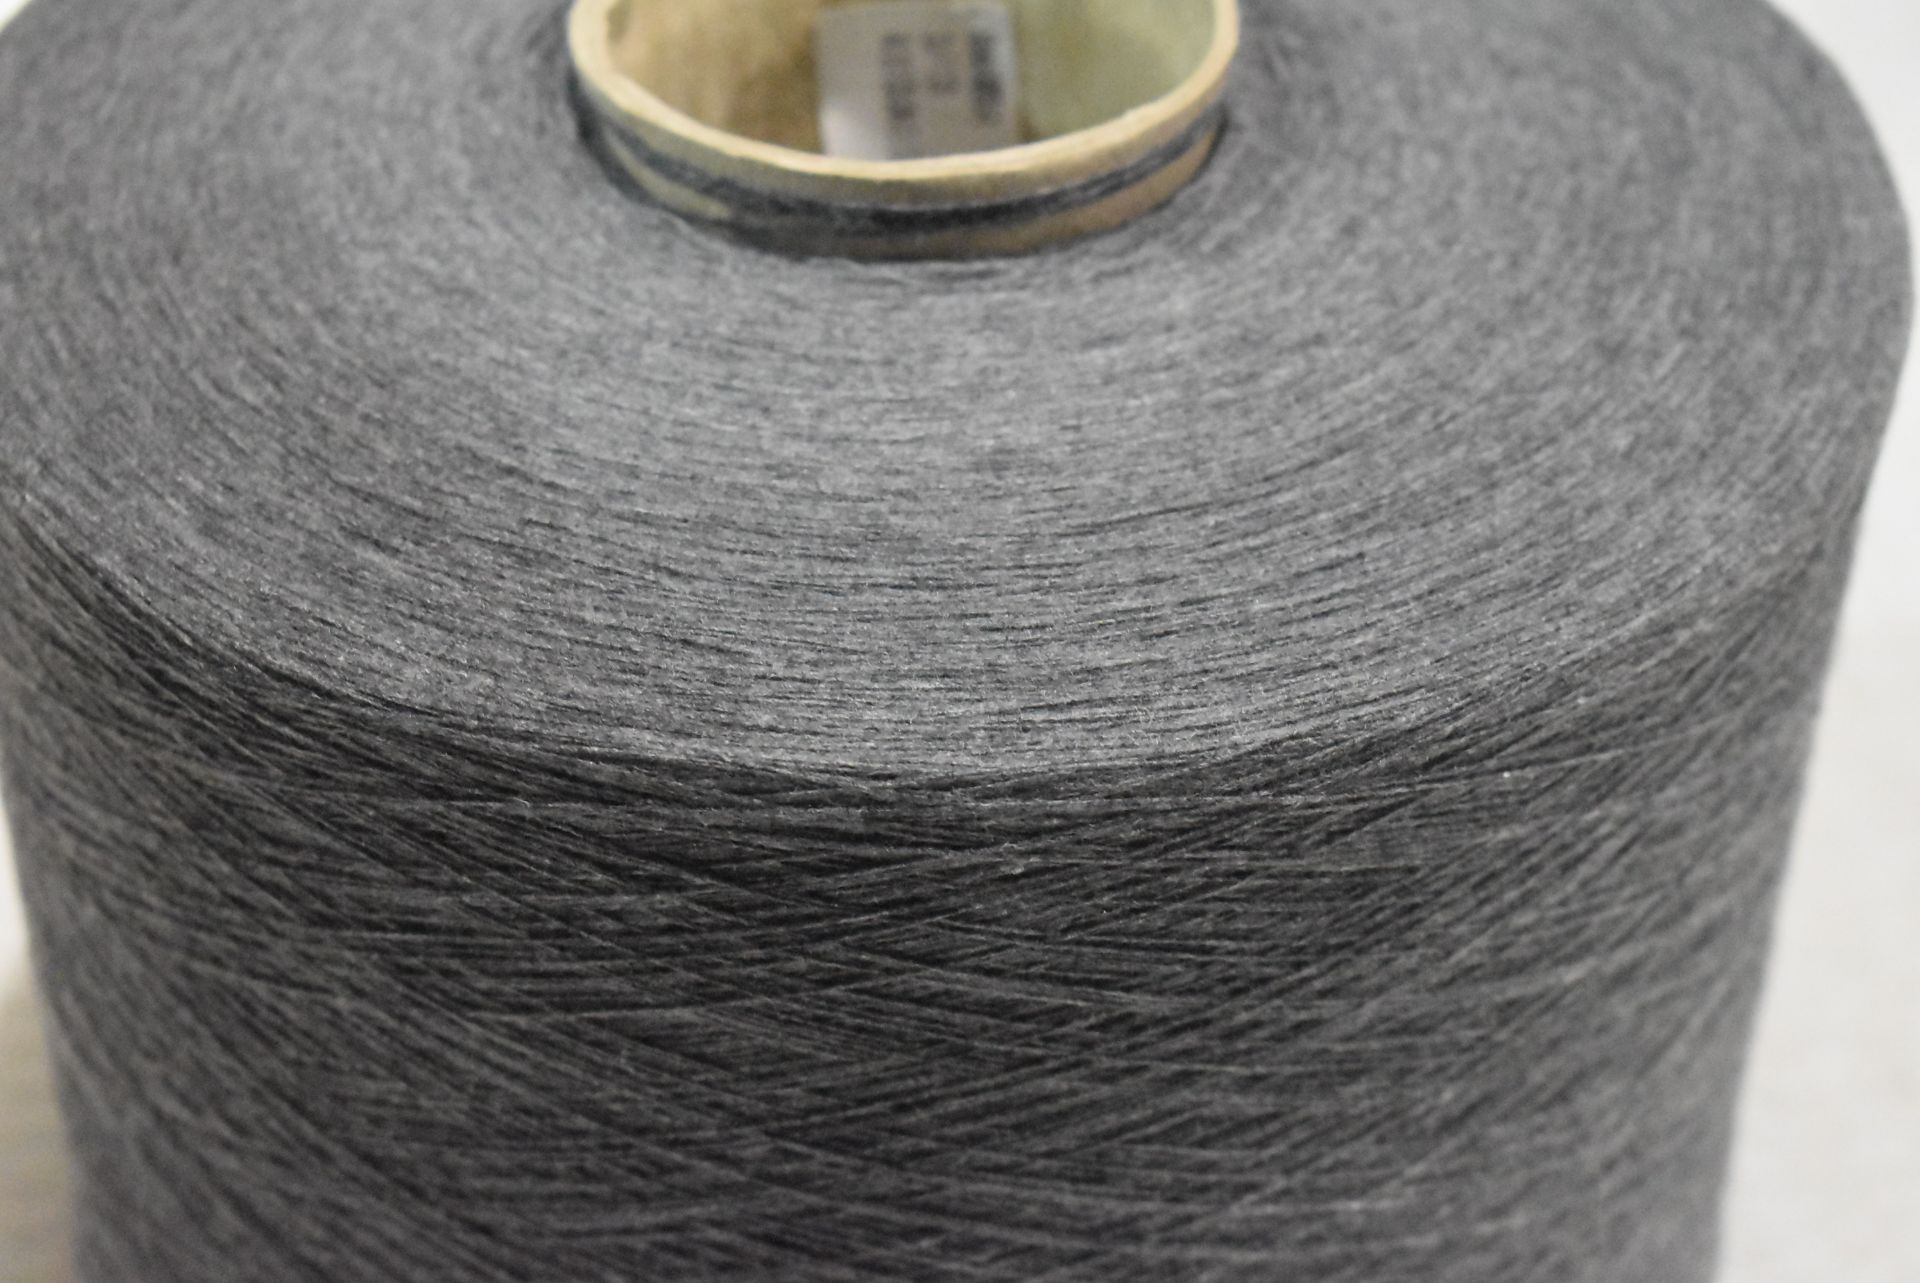 10 x Cones of 1/13 MicroCotton Knitting Yarn - Mid Grey - Approx Weight: 2,500g - New Stock ABL Yarn - Image 8 of 18